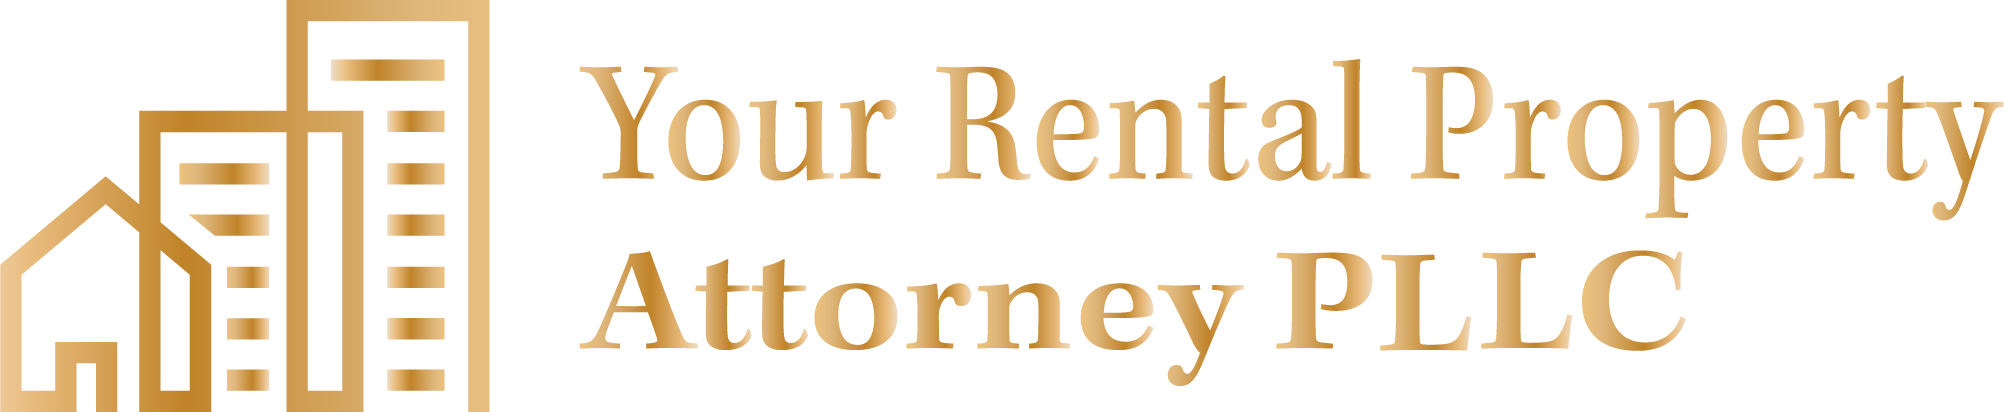 Your Rental Property Attorney